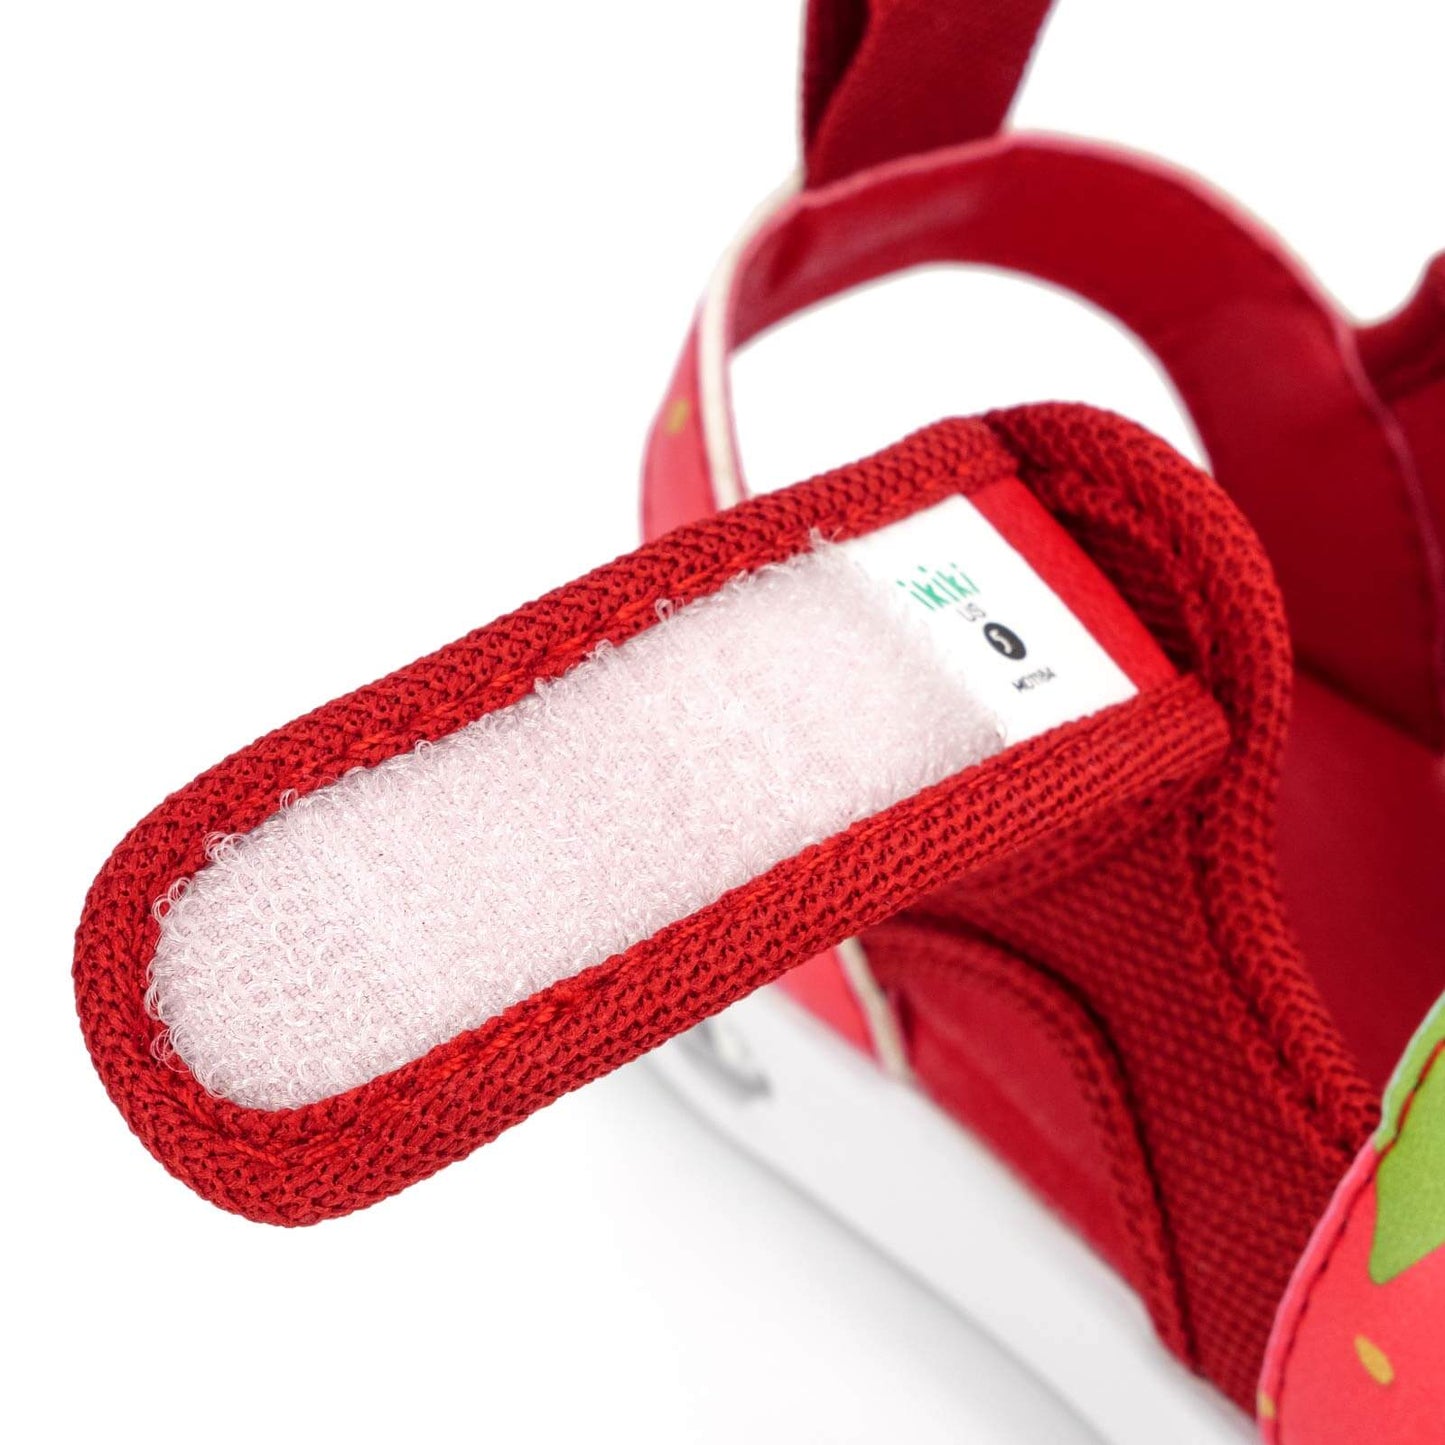 
                  
                    Strawberry Squeaky Toddler Sandals | Red
                  
                